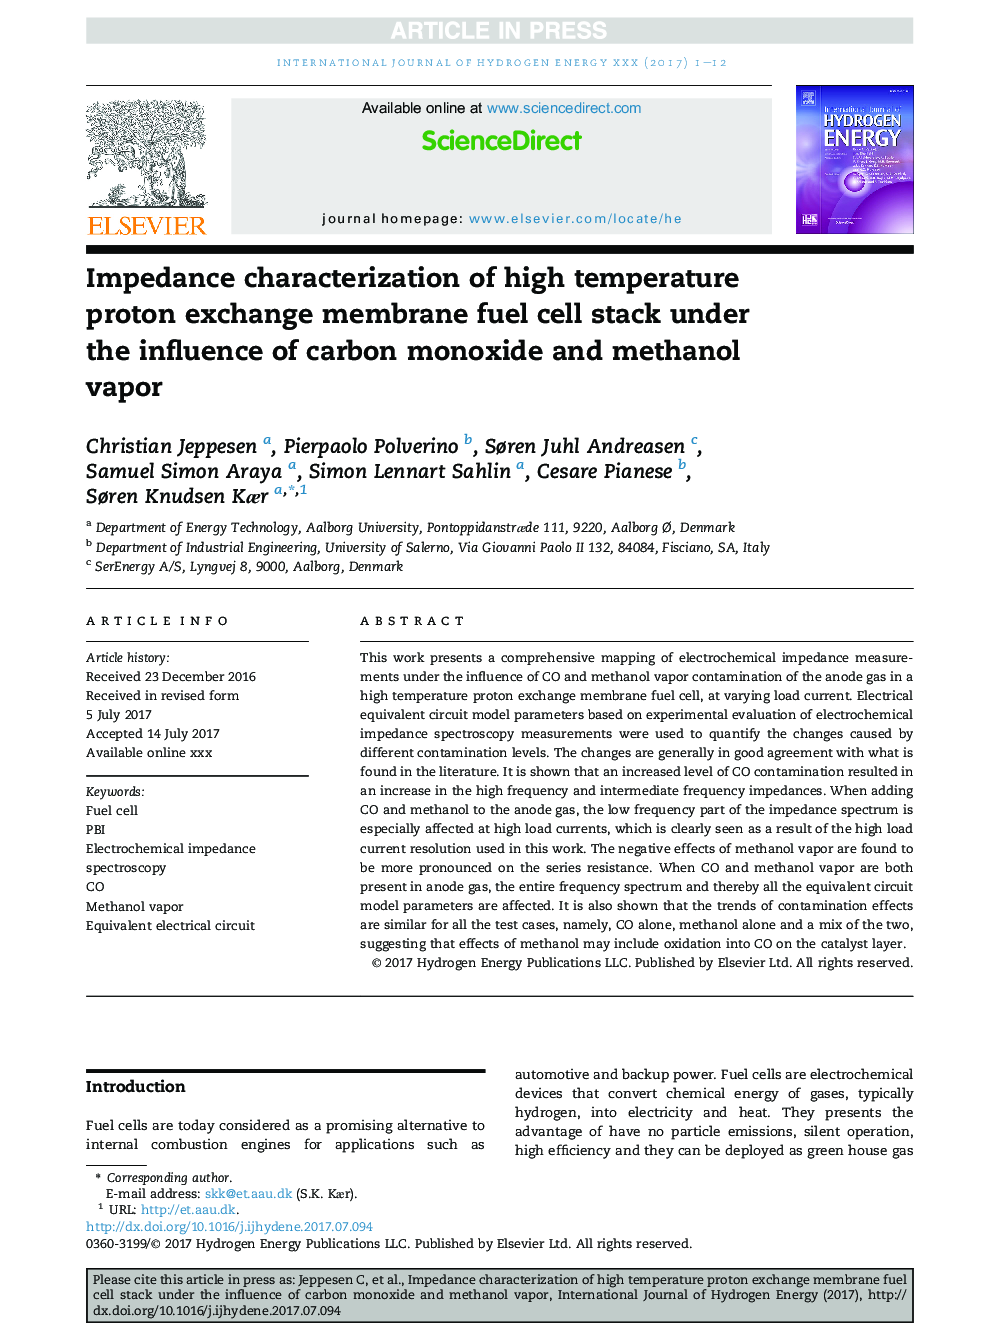 Impedance characterization of high temperature proton exchange membrane fuel cell stack under the influence of carbon monoxide and methanol vapor